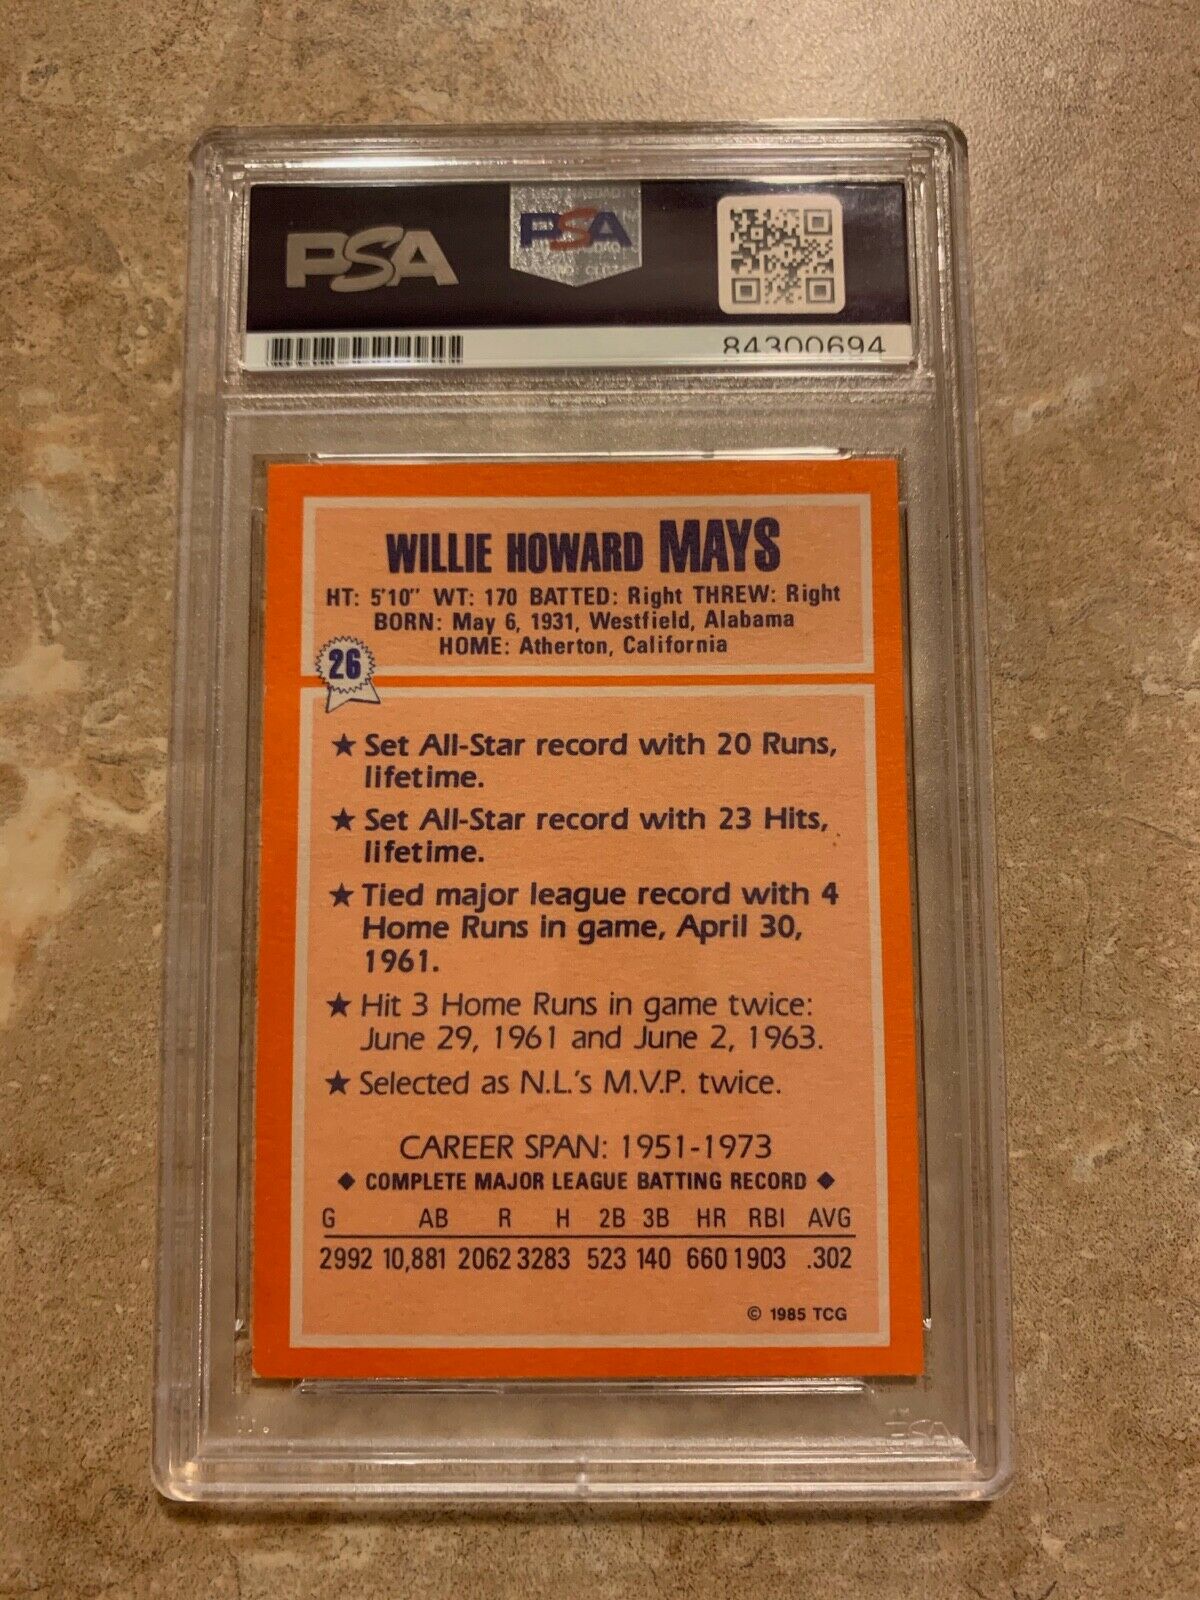 1985 Topps Collectors' Series Willie Mays Autographed Card PSA